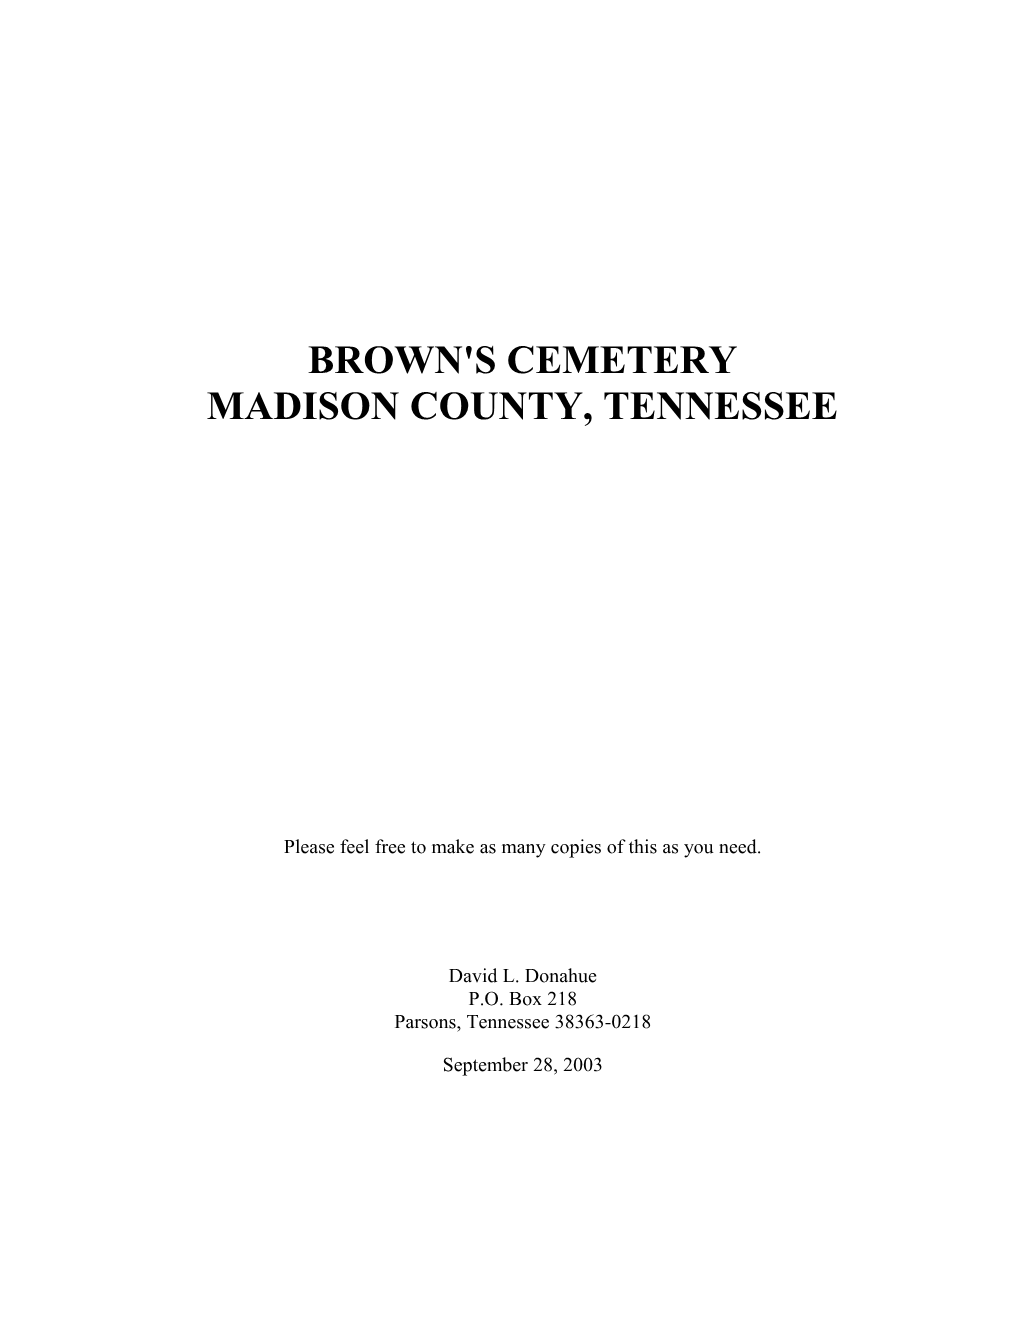 Brown's Cemetery, Madison County, Tennessee